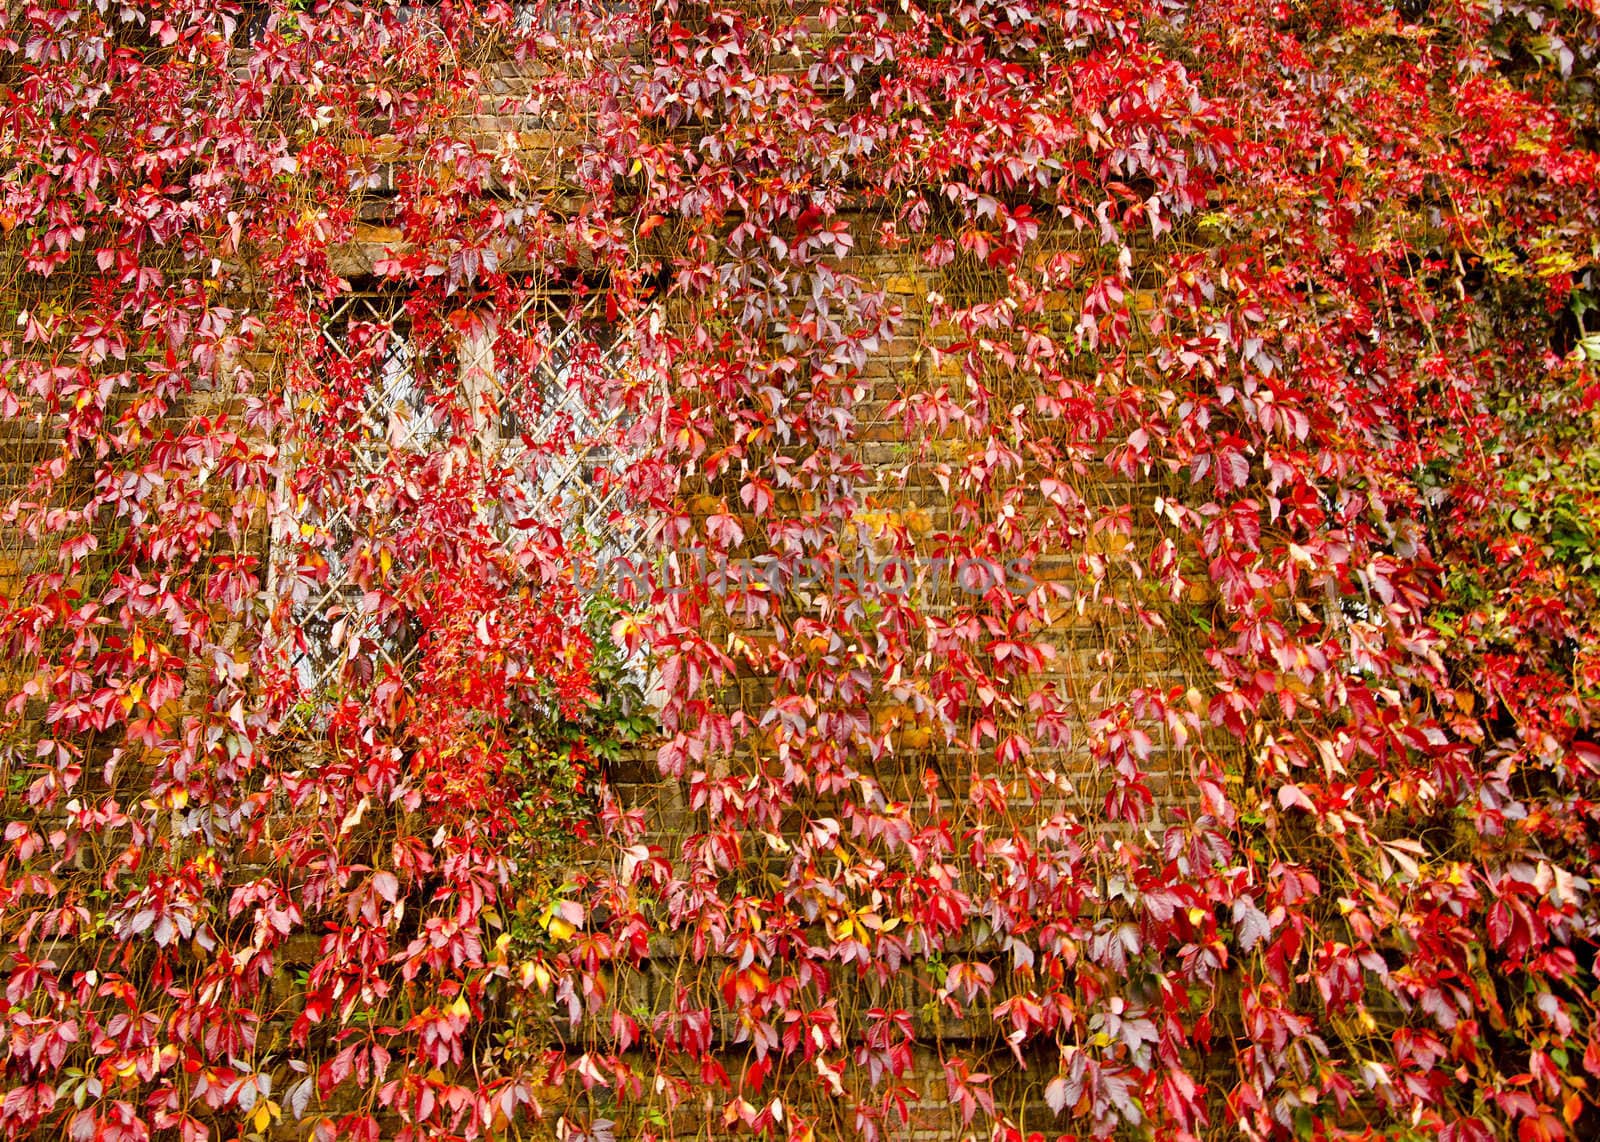 Colorful creepers covers wall made of concrete. Autumn colors.